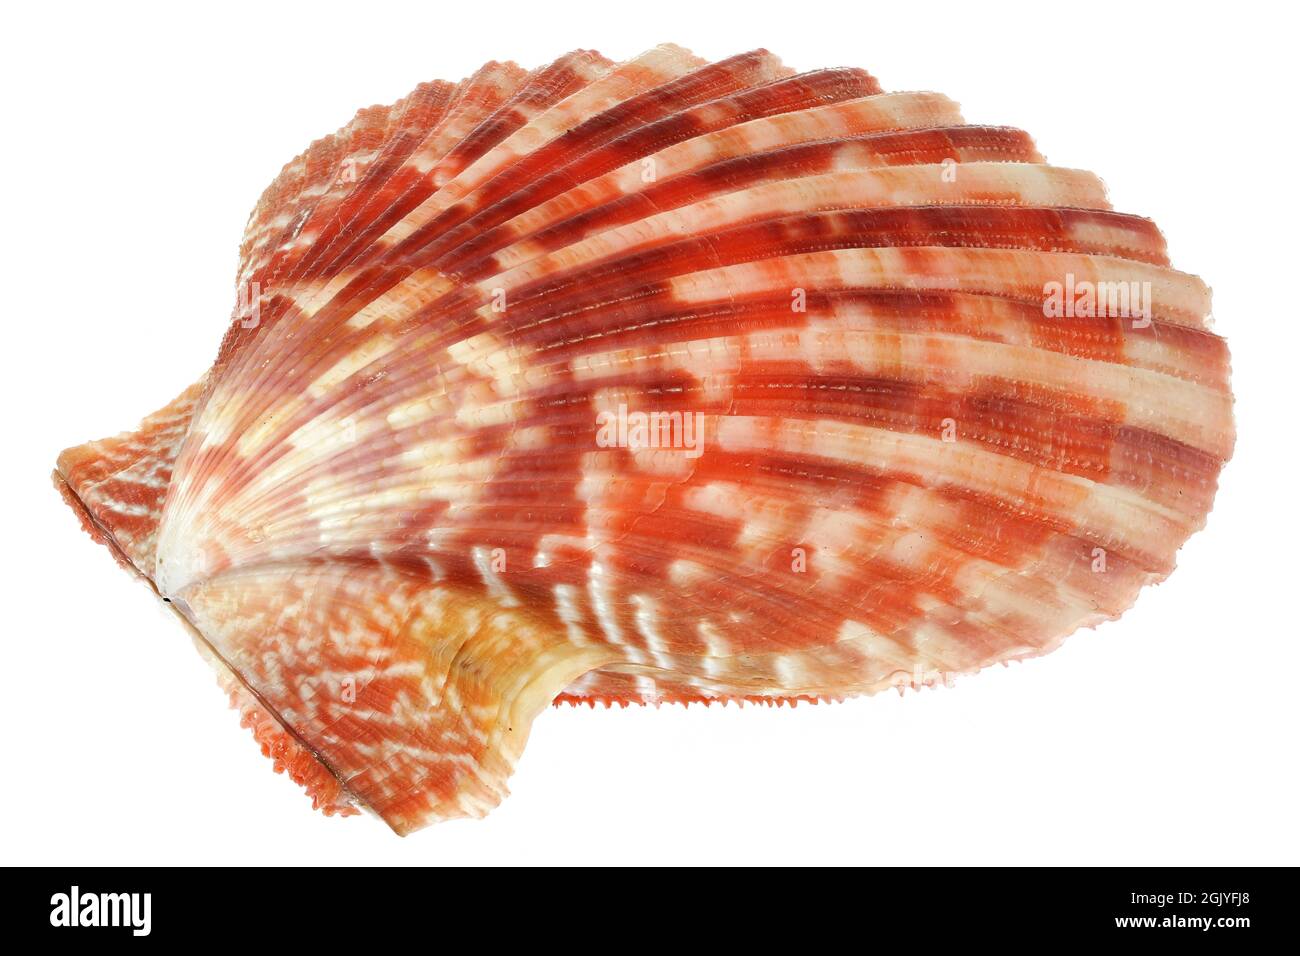 bivalve saltwater clam (Mimichlamys sanguinea) from Bantayan, Philippines isolated on white background Stock Photo